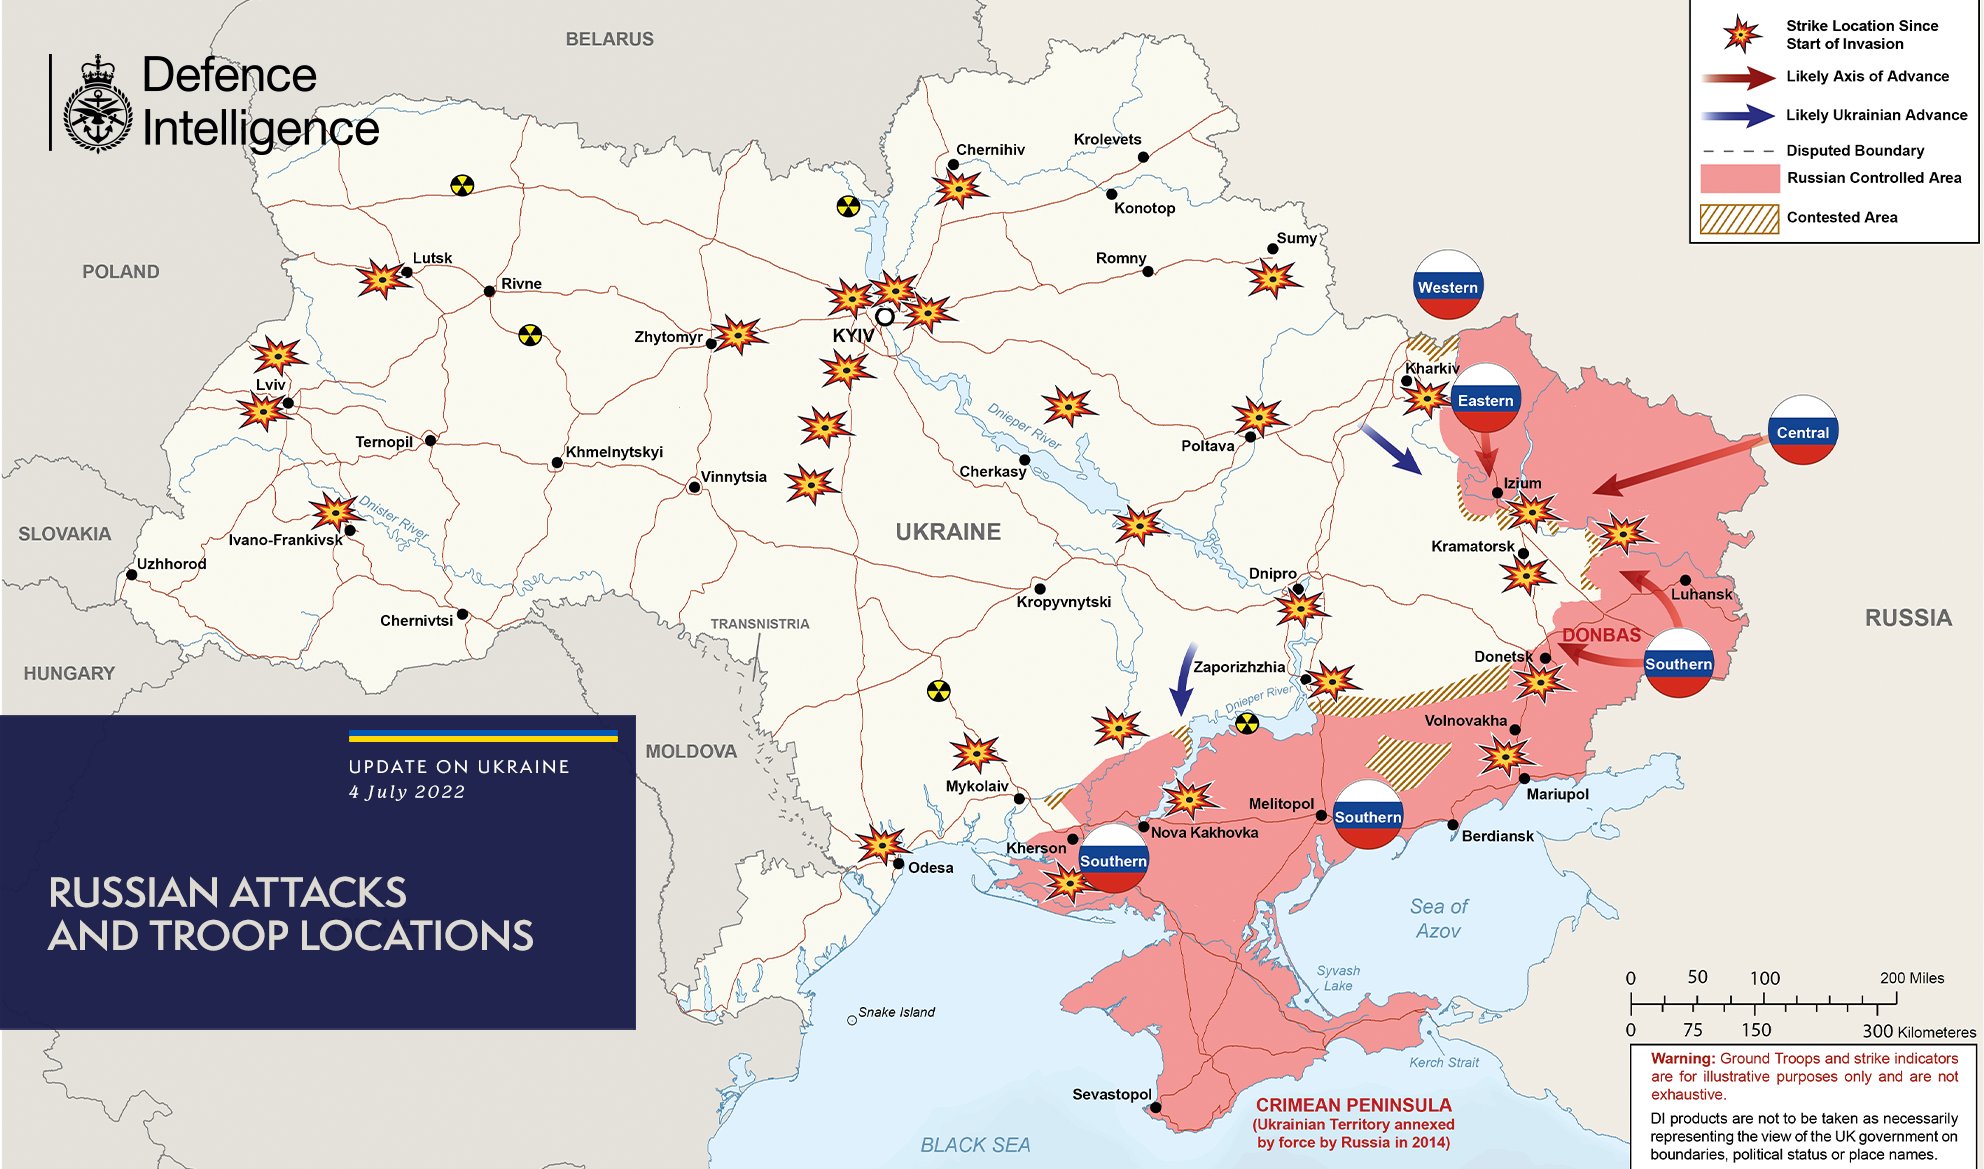  Russian attacks and troop locations map 4 July 2022